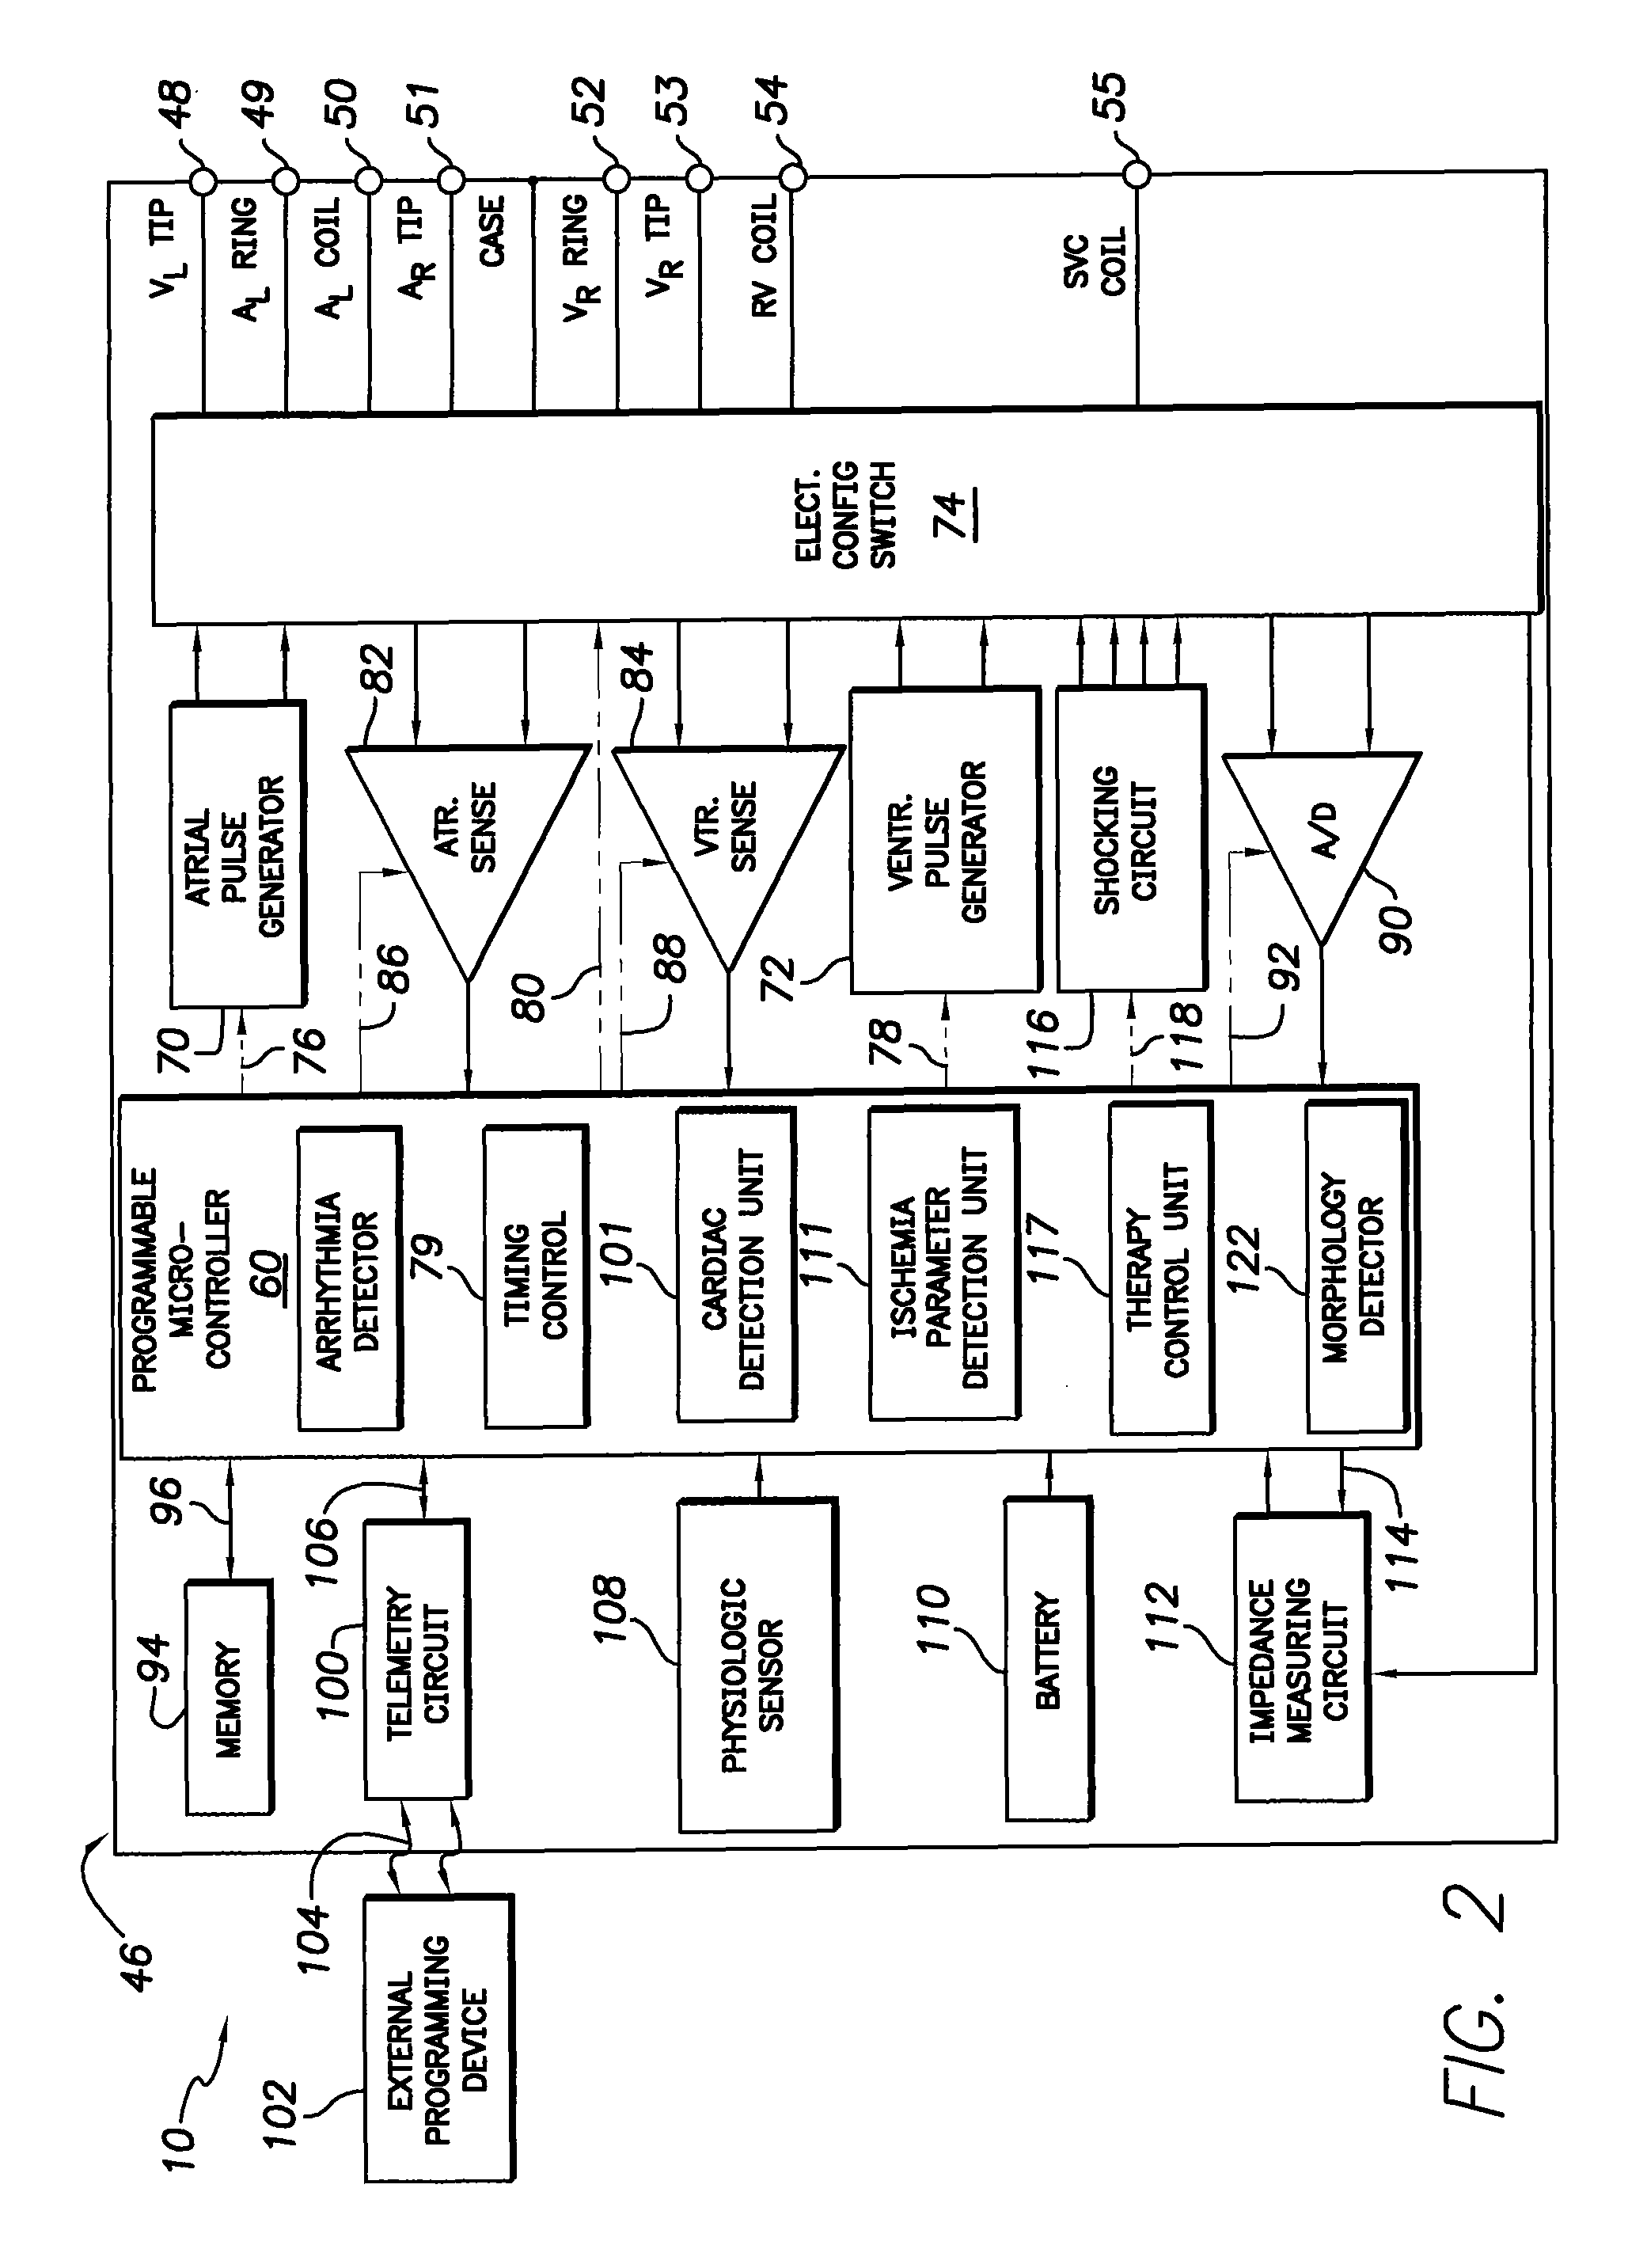 Method and system for automatically calibrating ischemia detection parameters